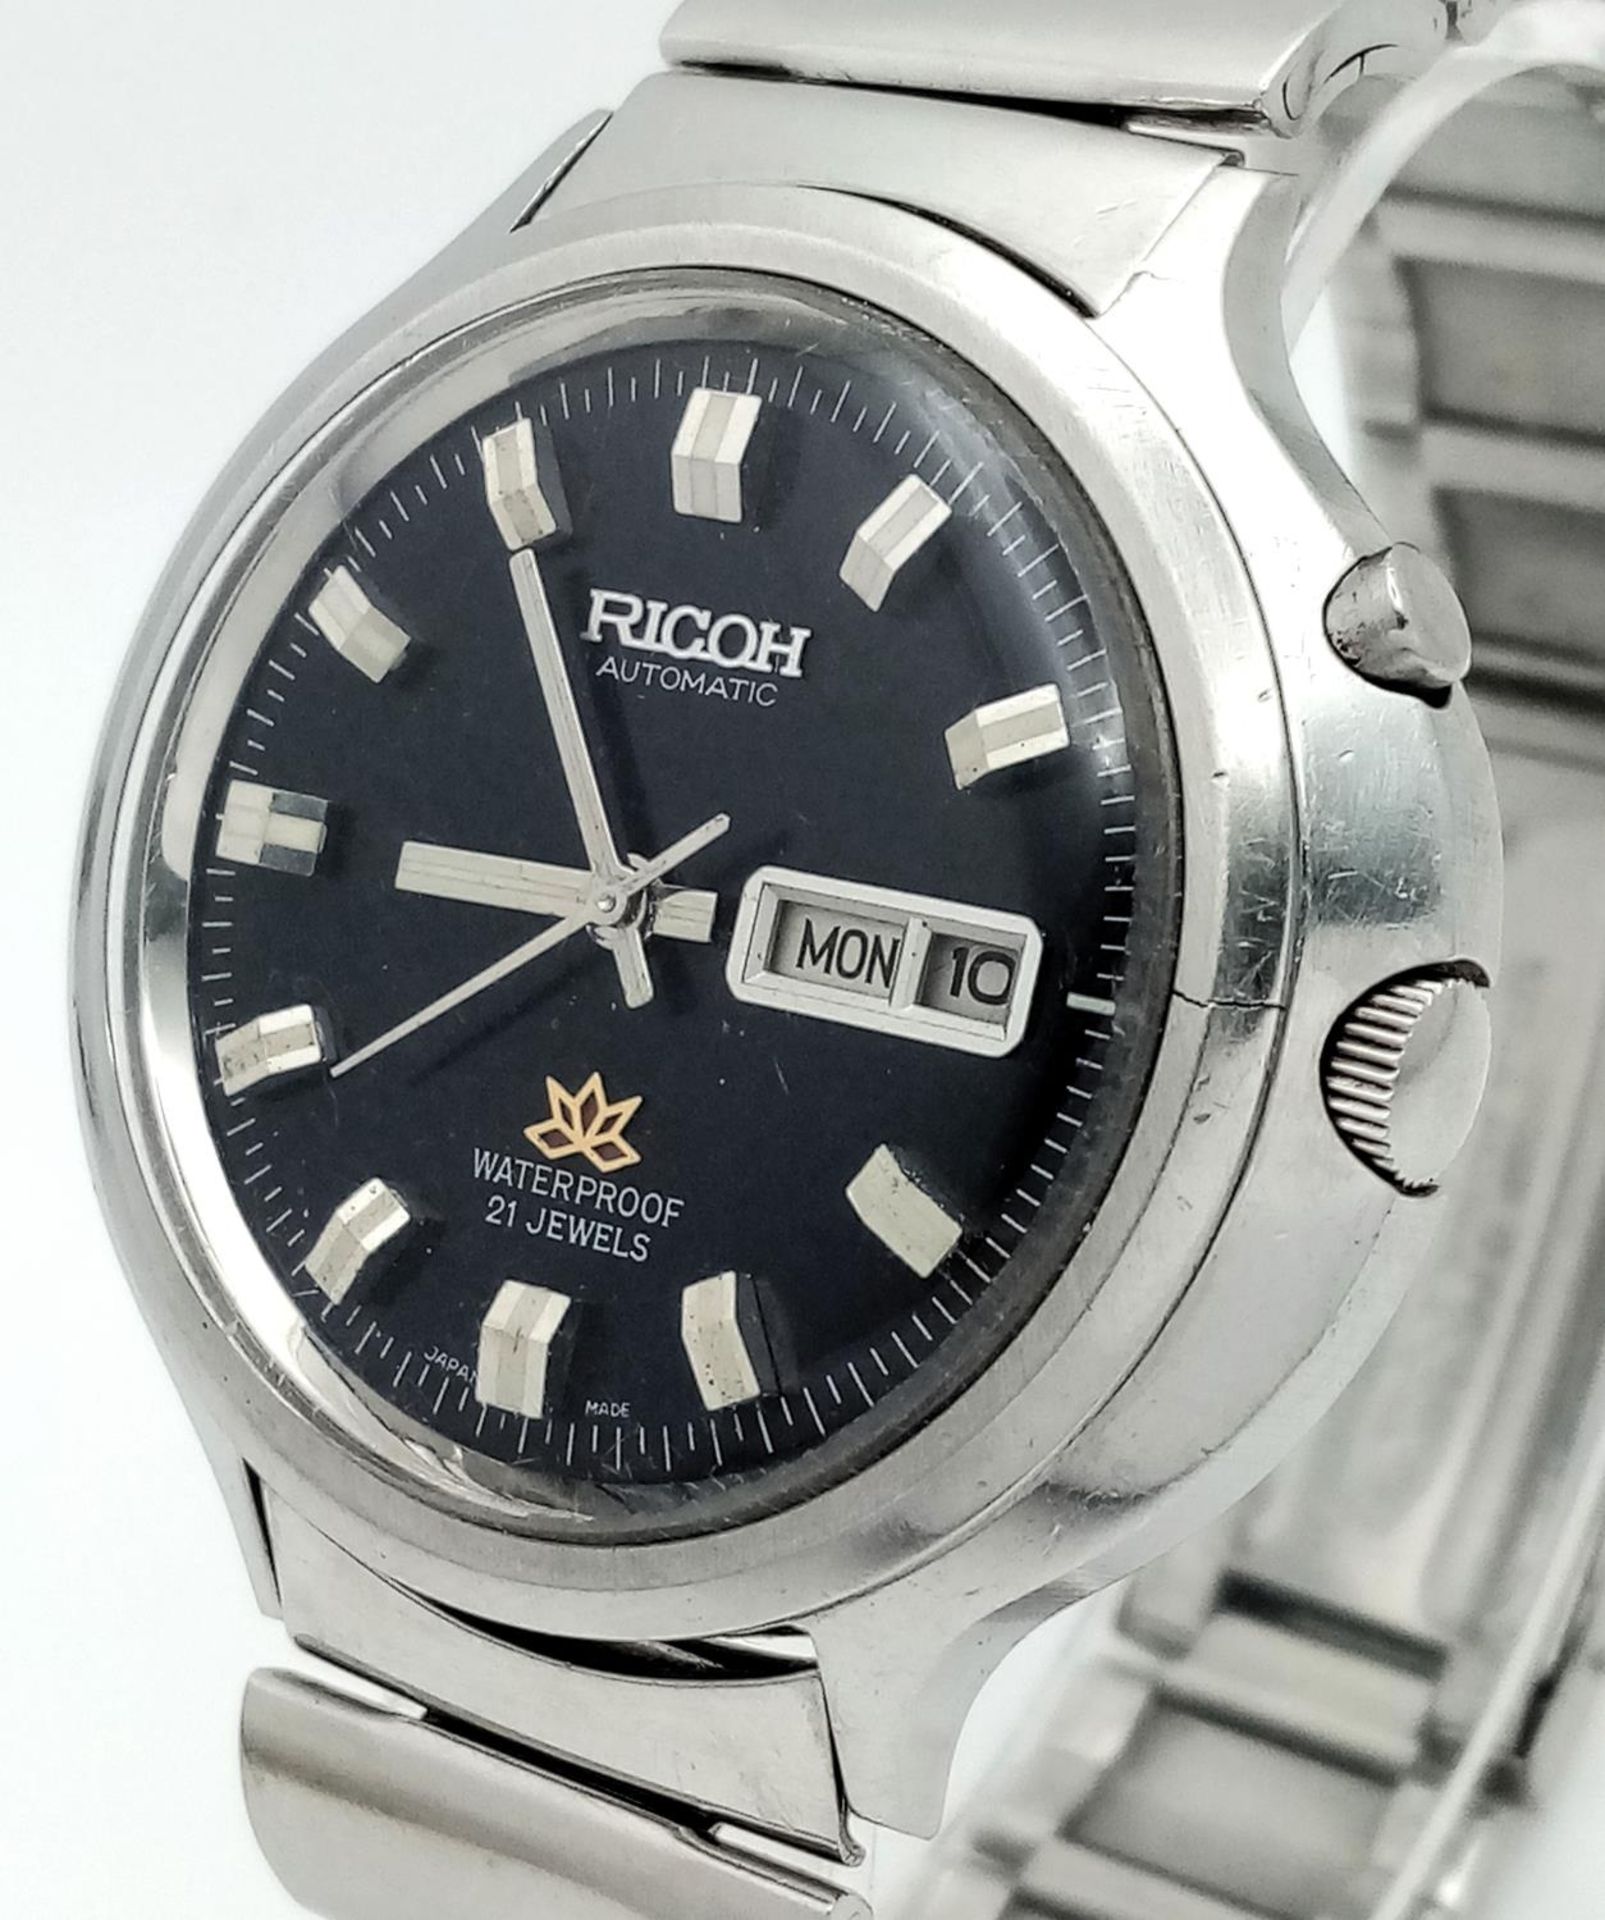 A Vintage Ricoh 21 Jewels Automatic Gents Watch. Stainless steel bracelet and case - 41mm. Black - Image 2 of 7